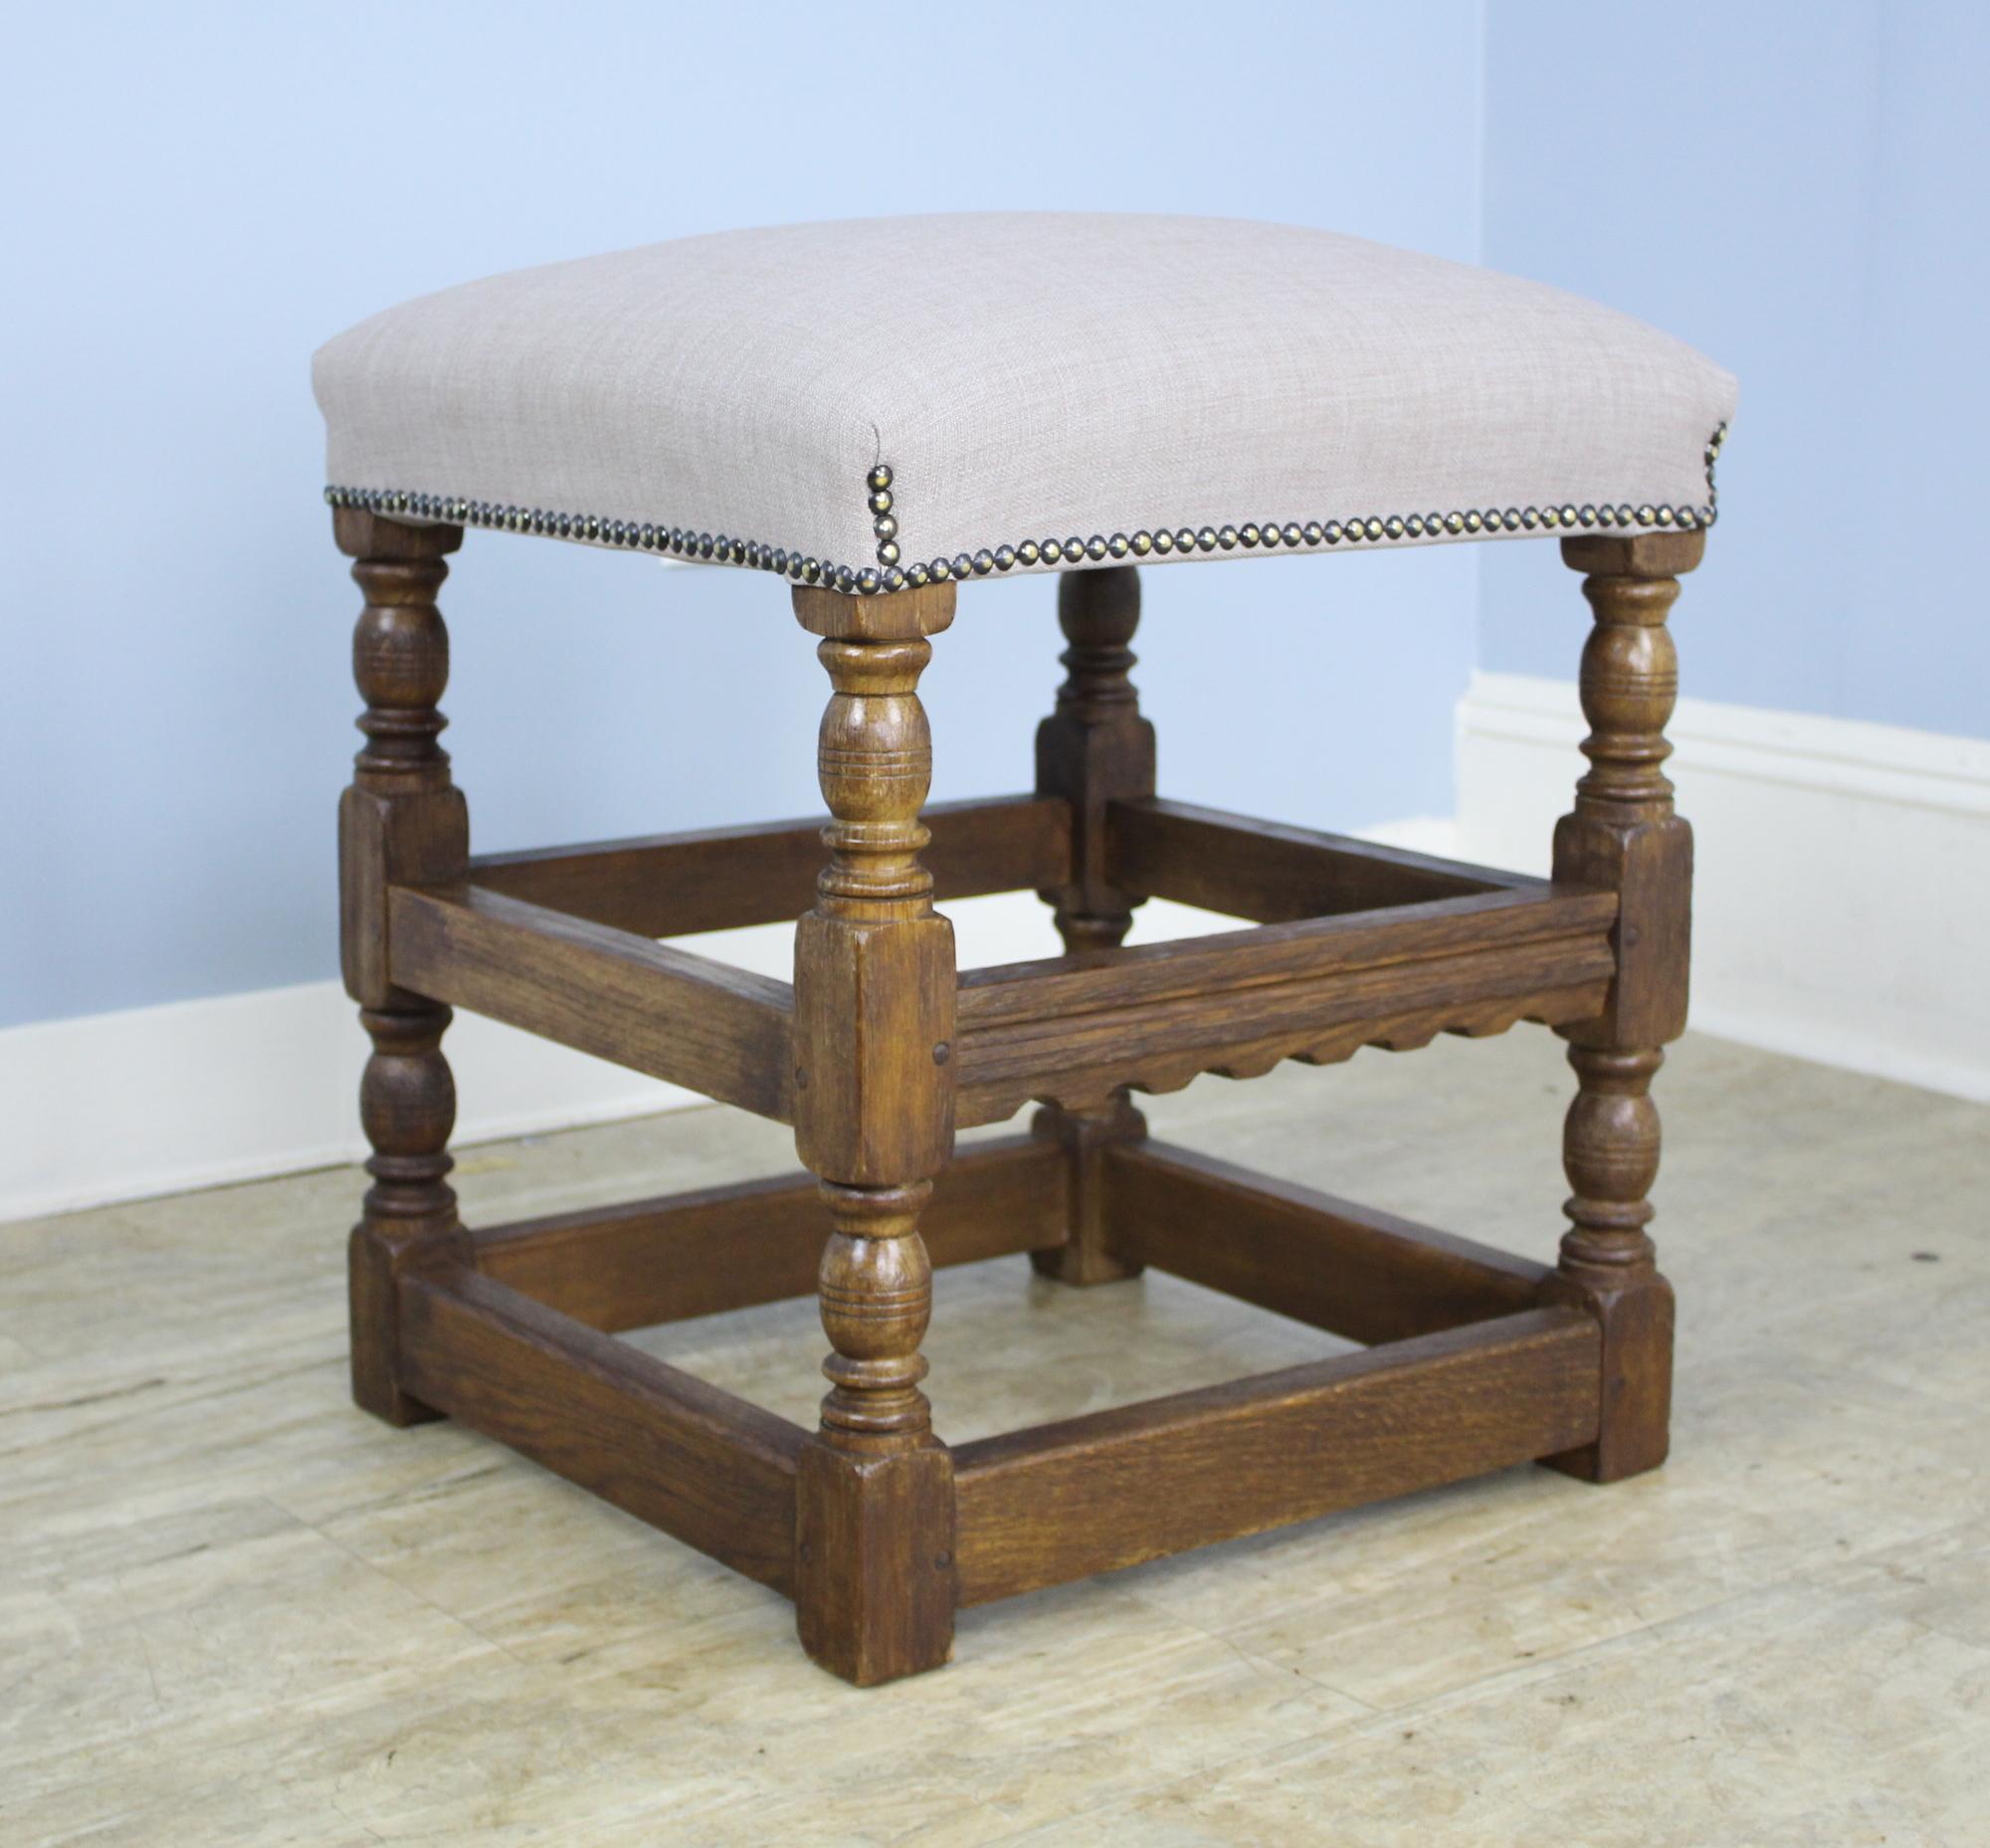 A charming pair of oak turned leg stools, newly upholstered in French linen. Highly decorative!